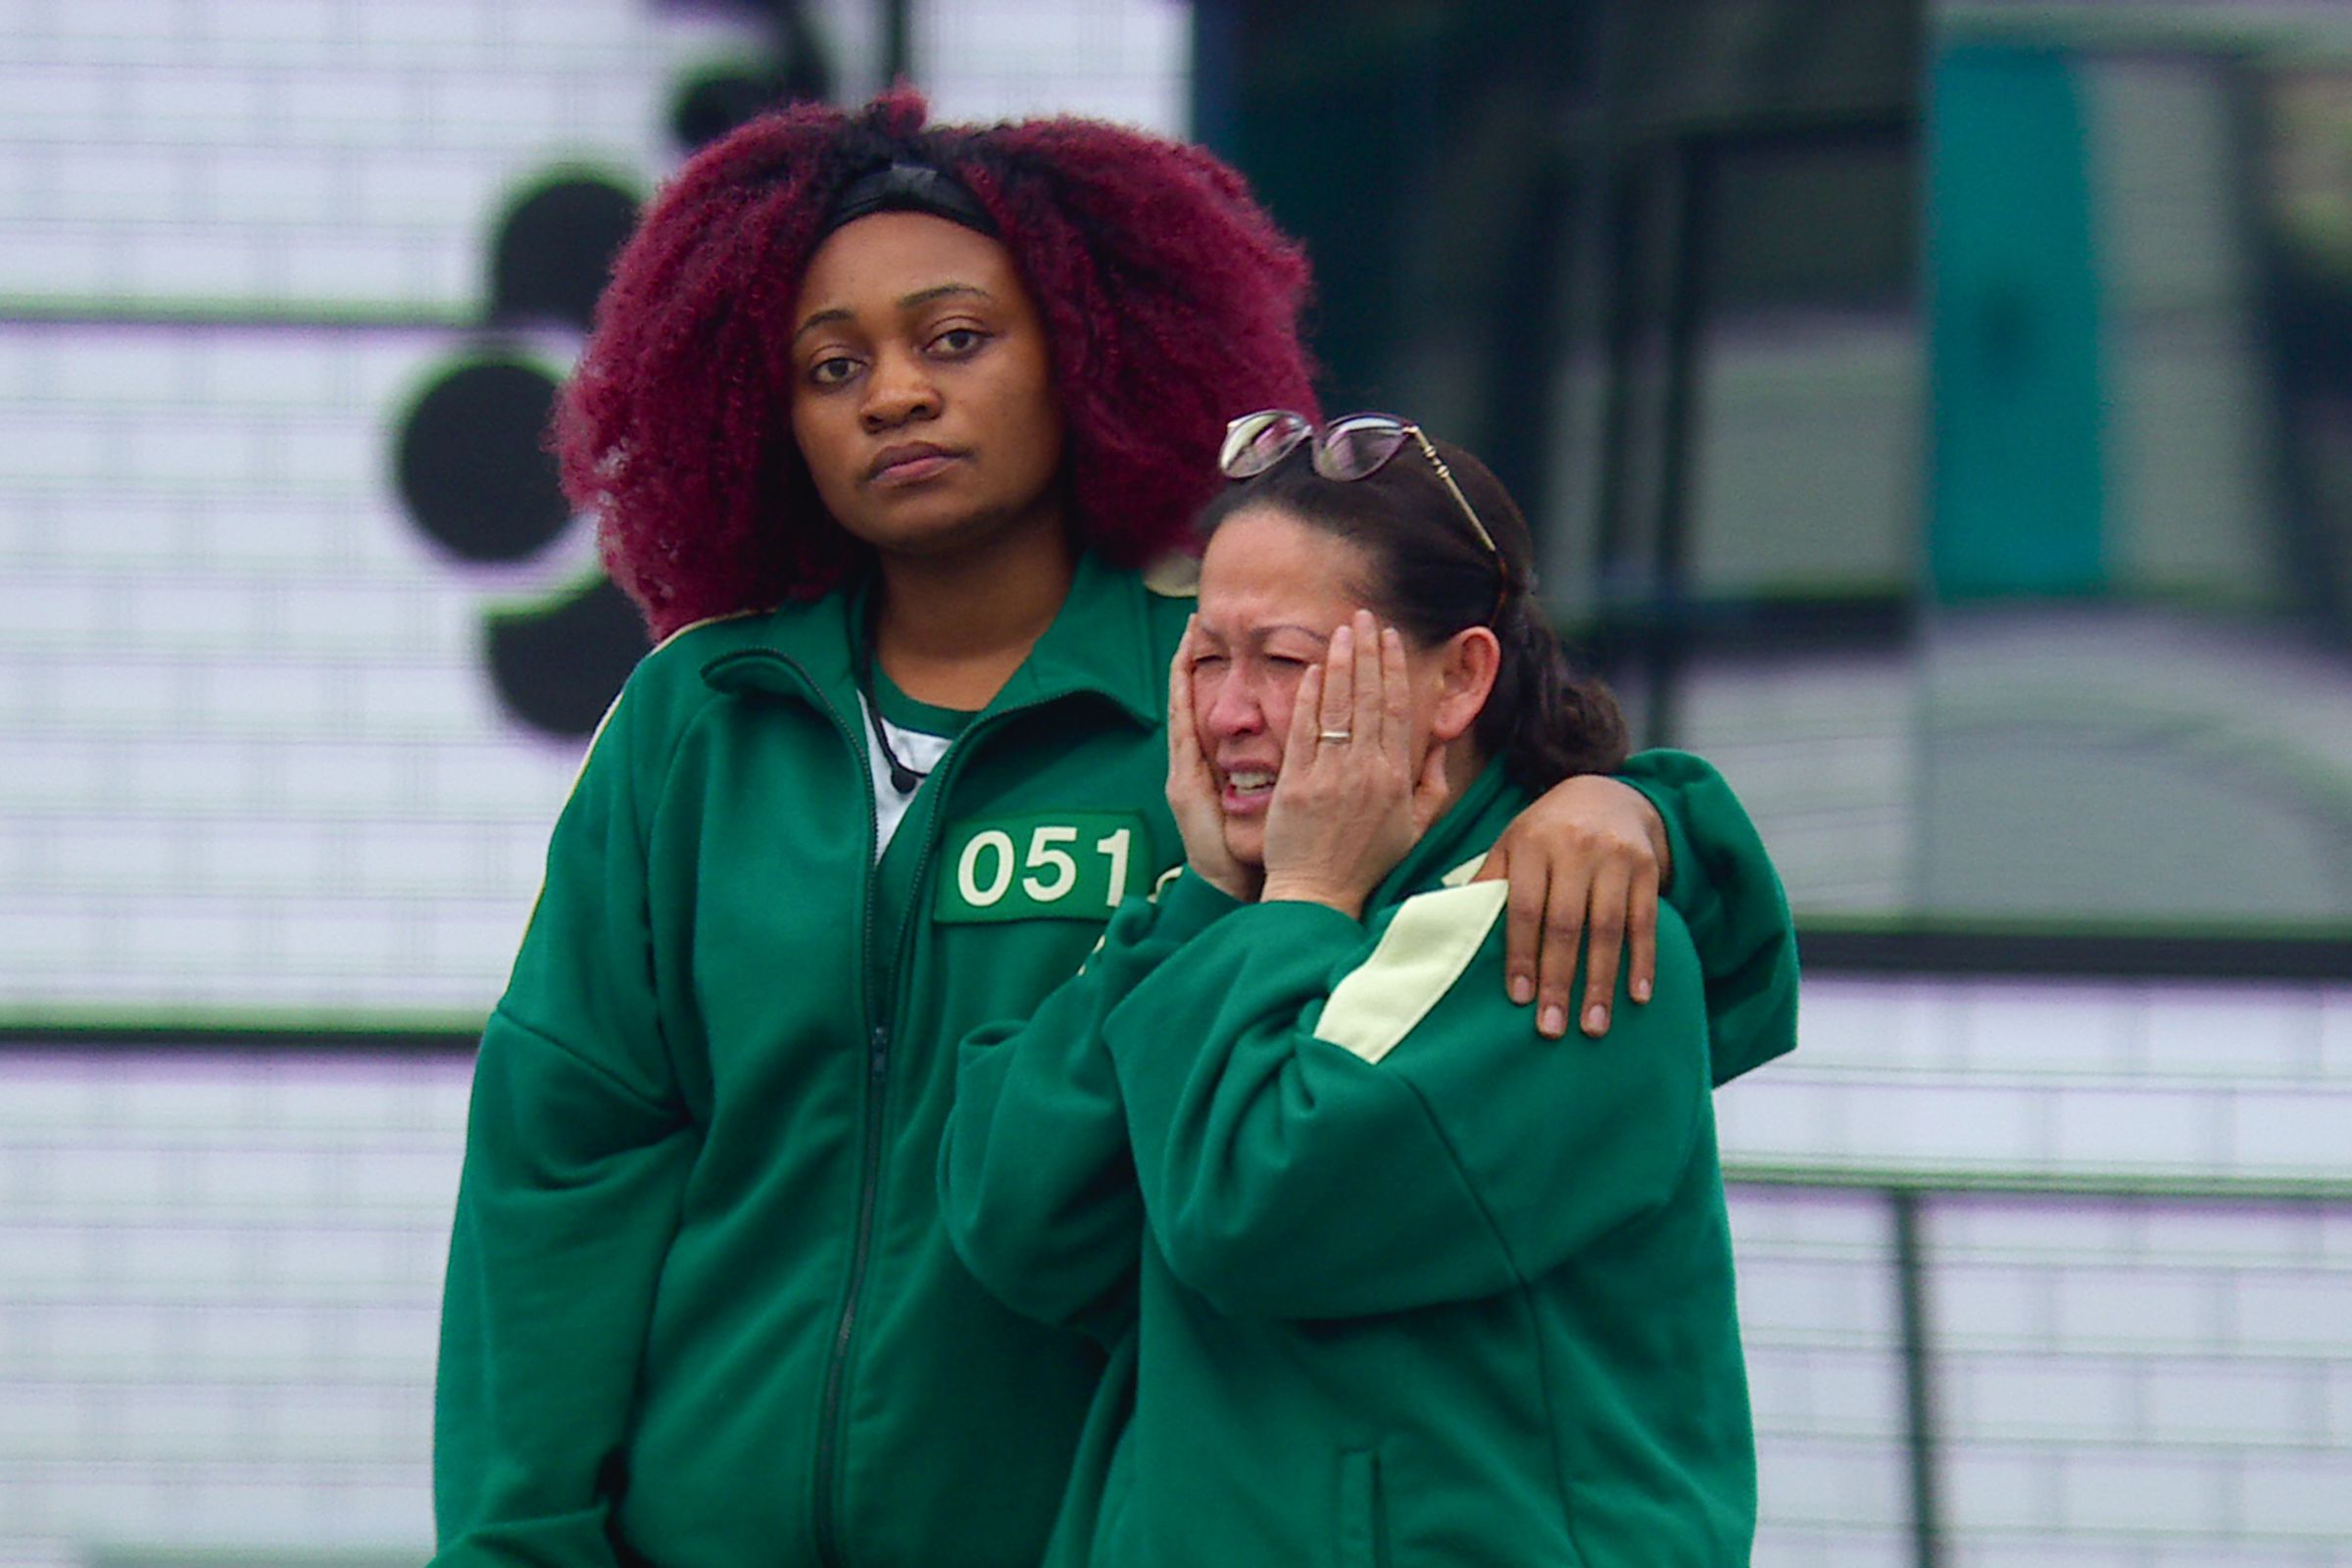 Two contestants wearing green jumpsuits stand together, with one appearing to be upset.